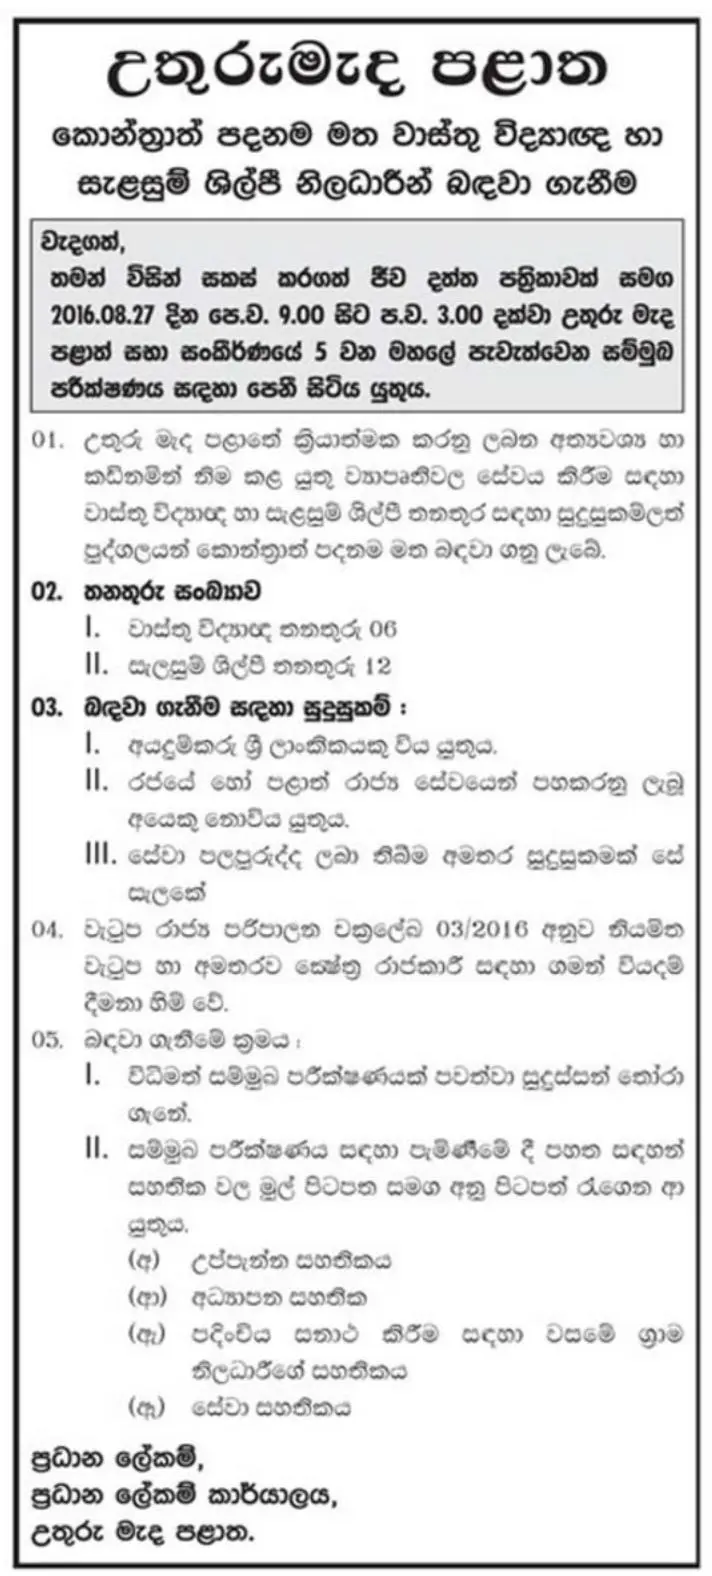 Architect and Draughtsman Class III Aviation Services Sinhala